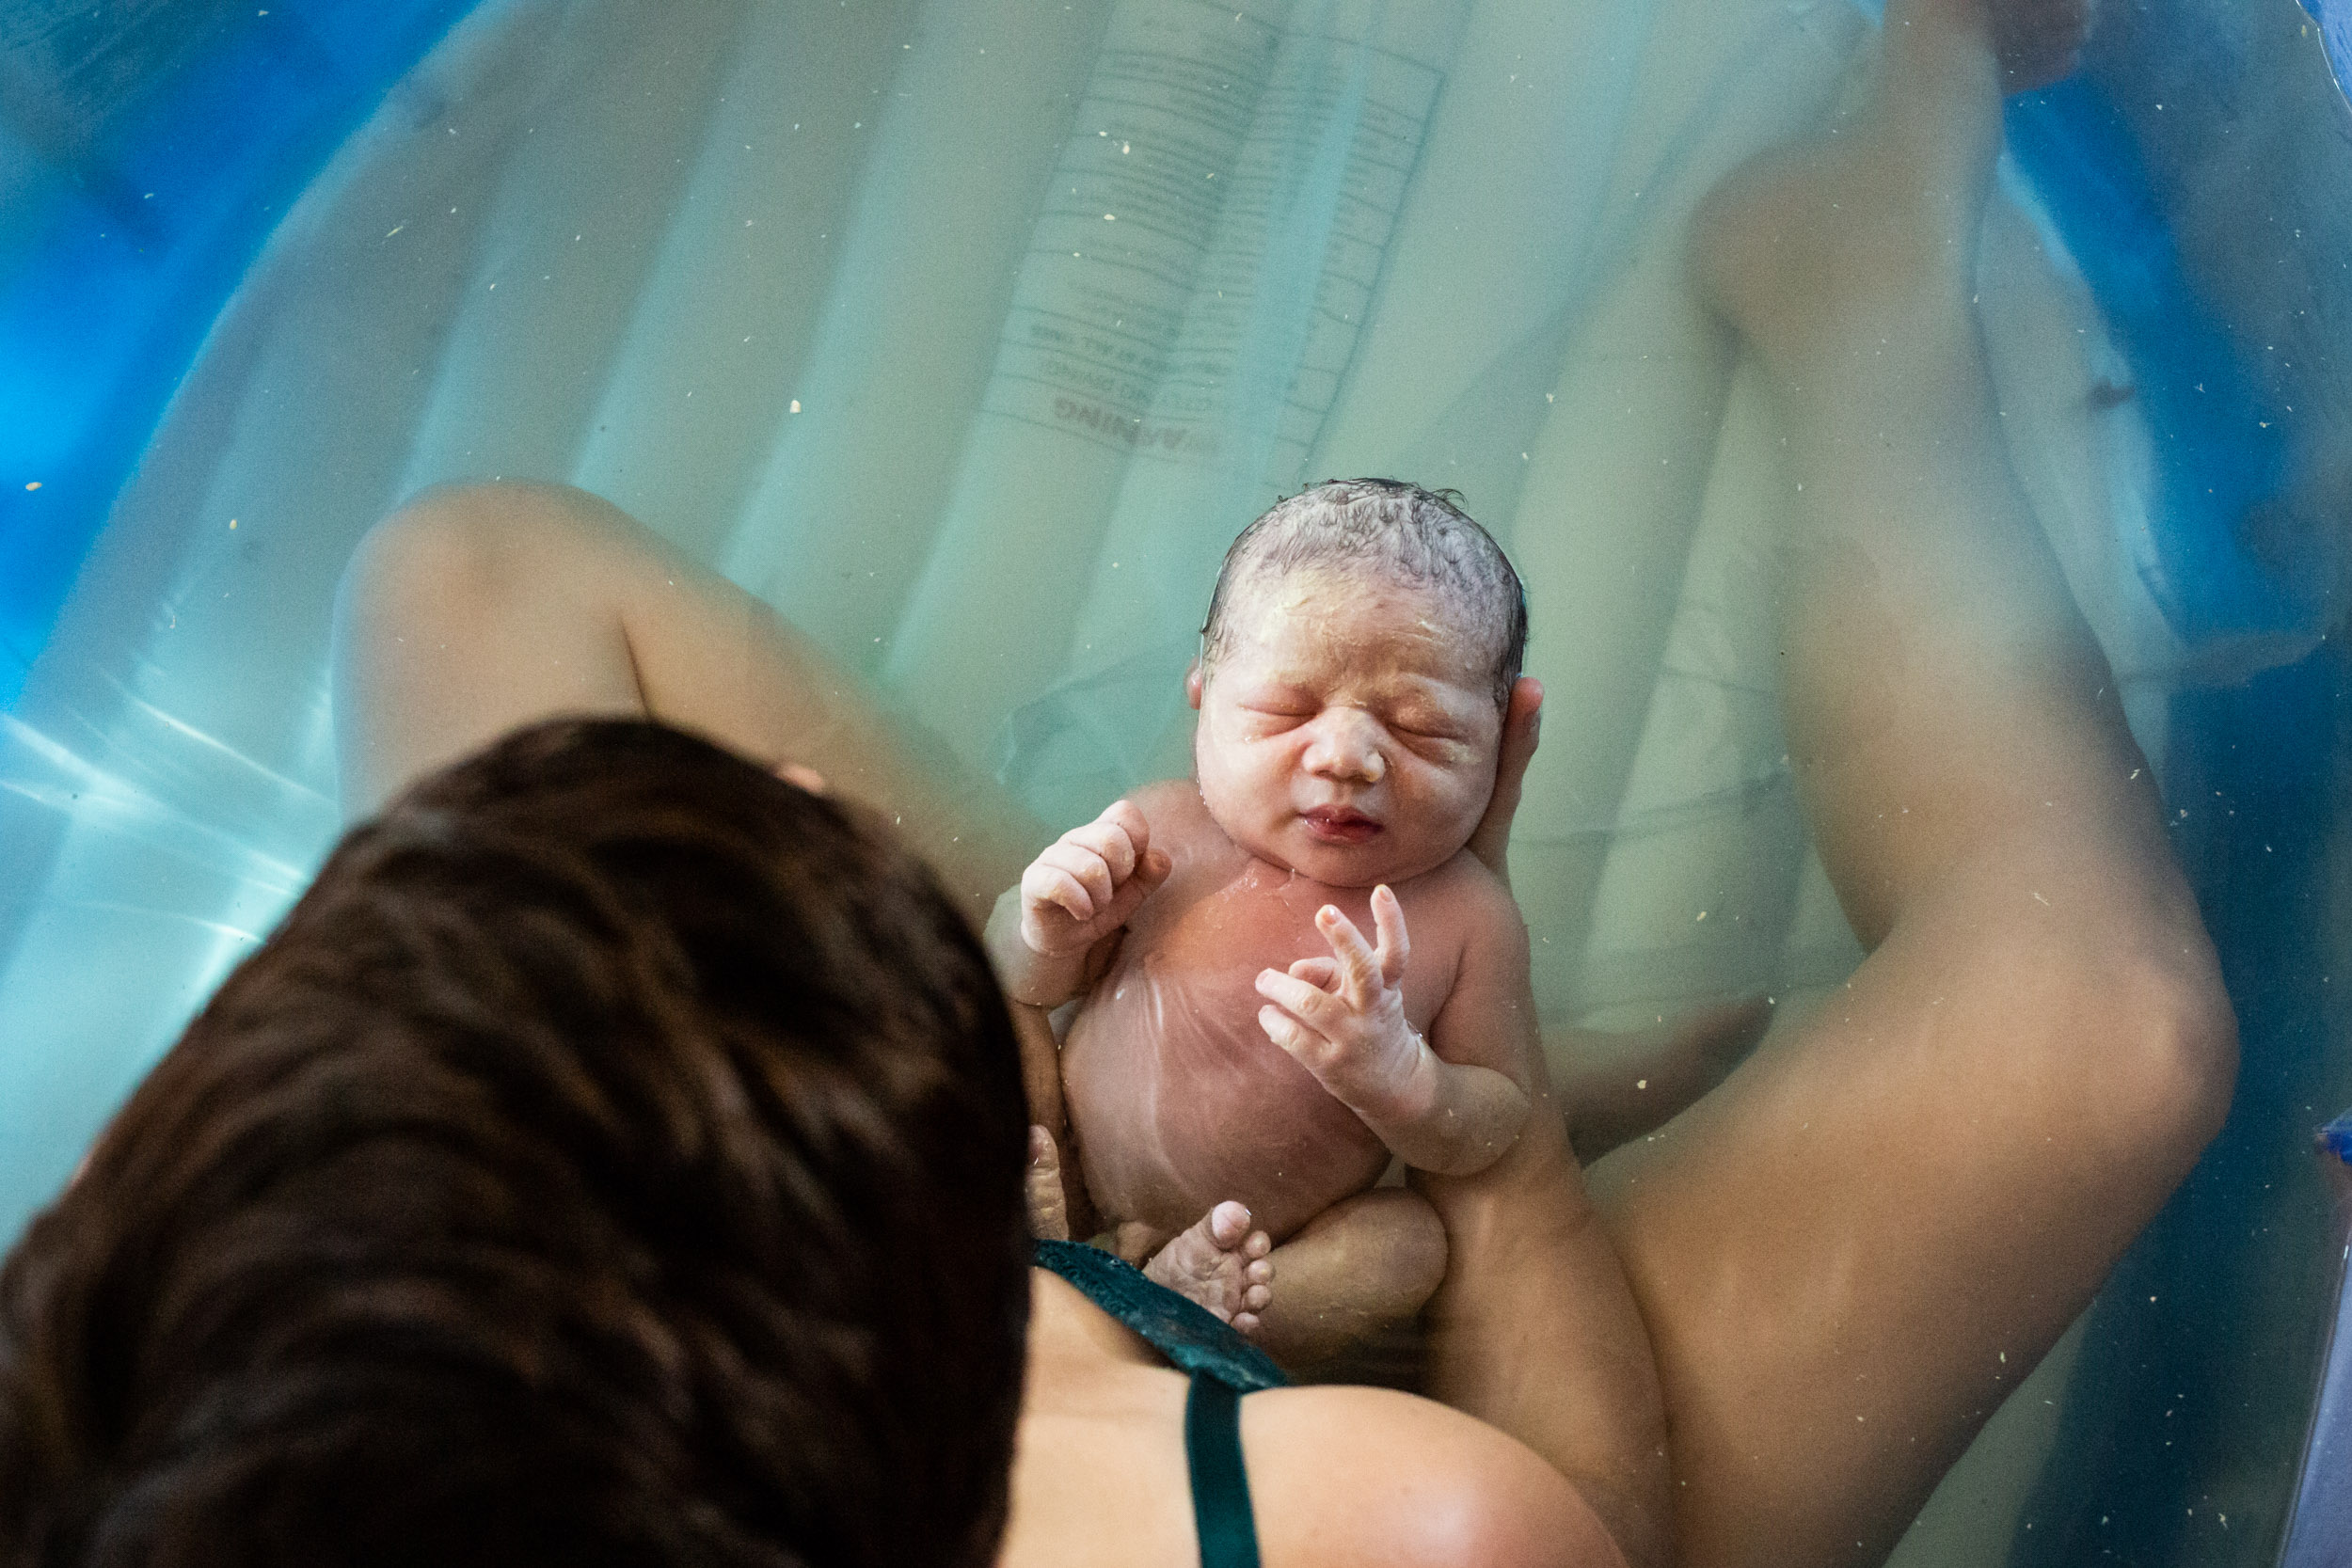 newborn baby in birth tub from above